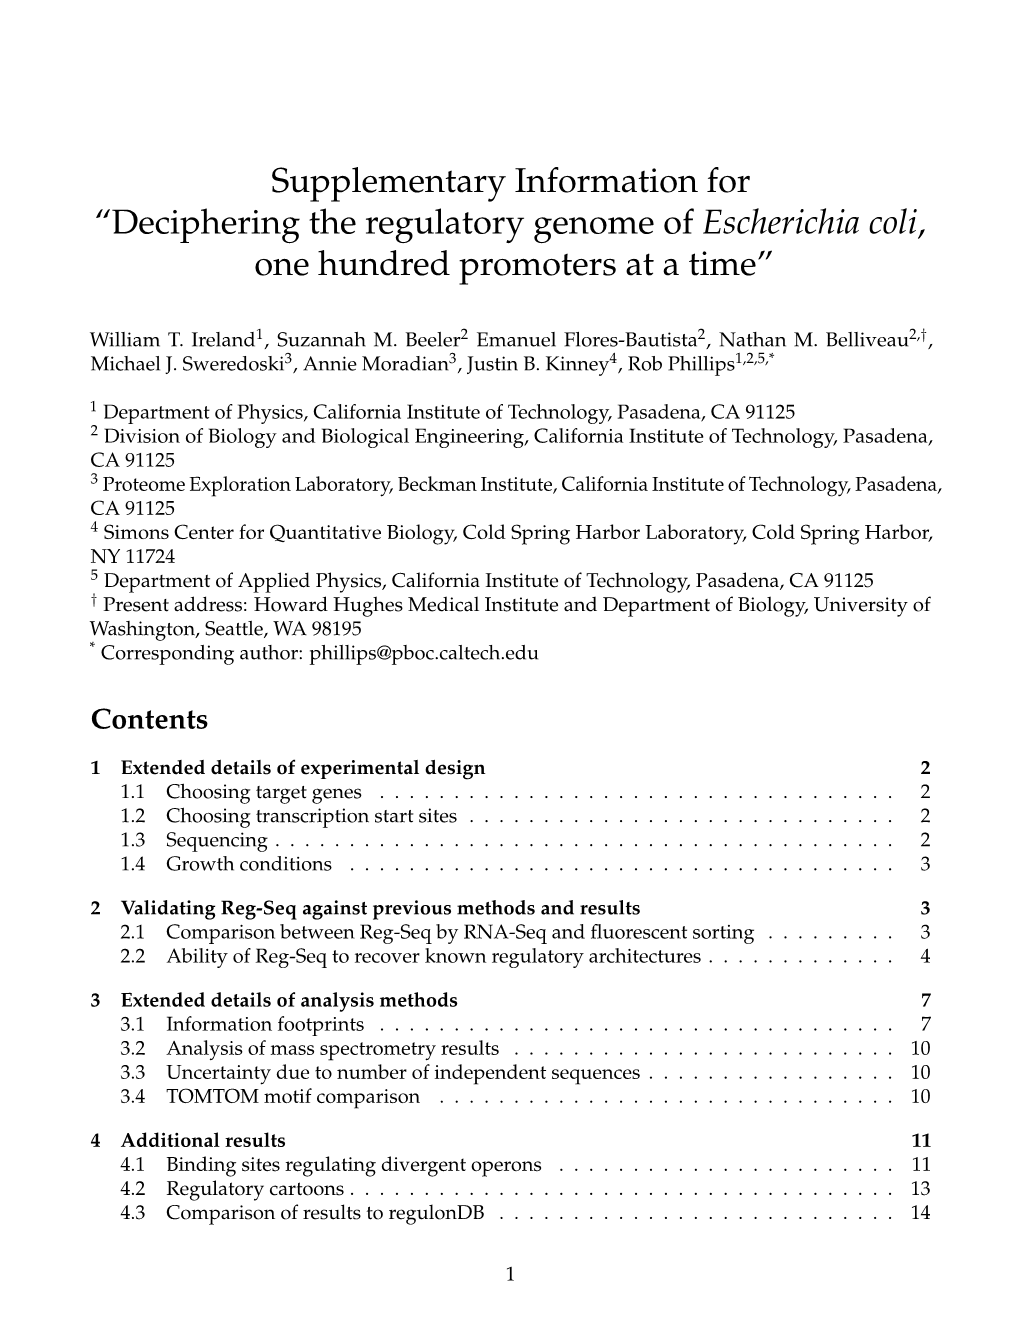 Supplementary Information for “Deciphering the Regulatory Genome of Escherichia Coli, One Hundred Promoters at a Time”